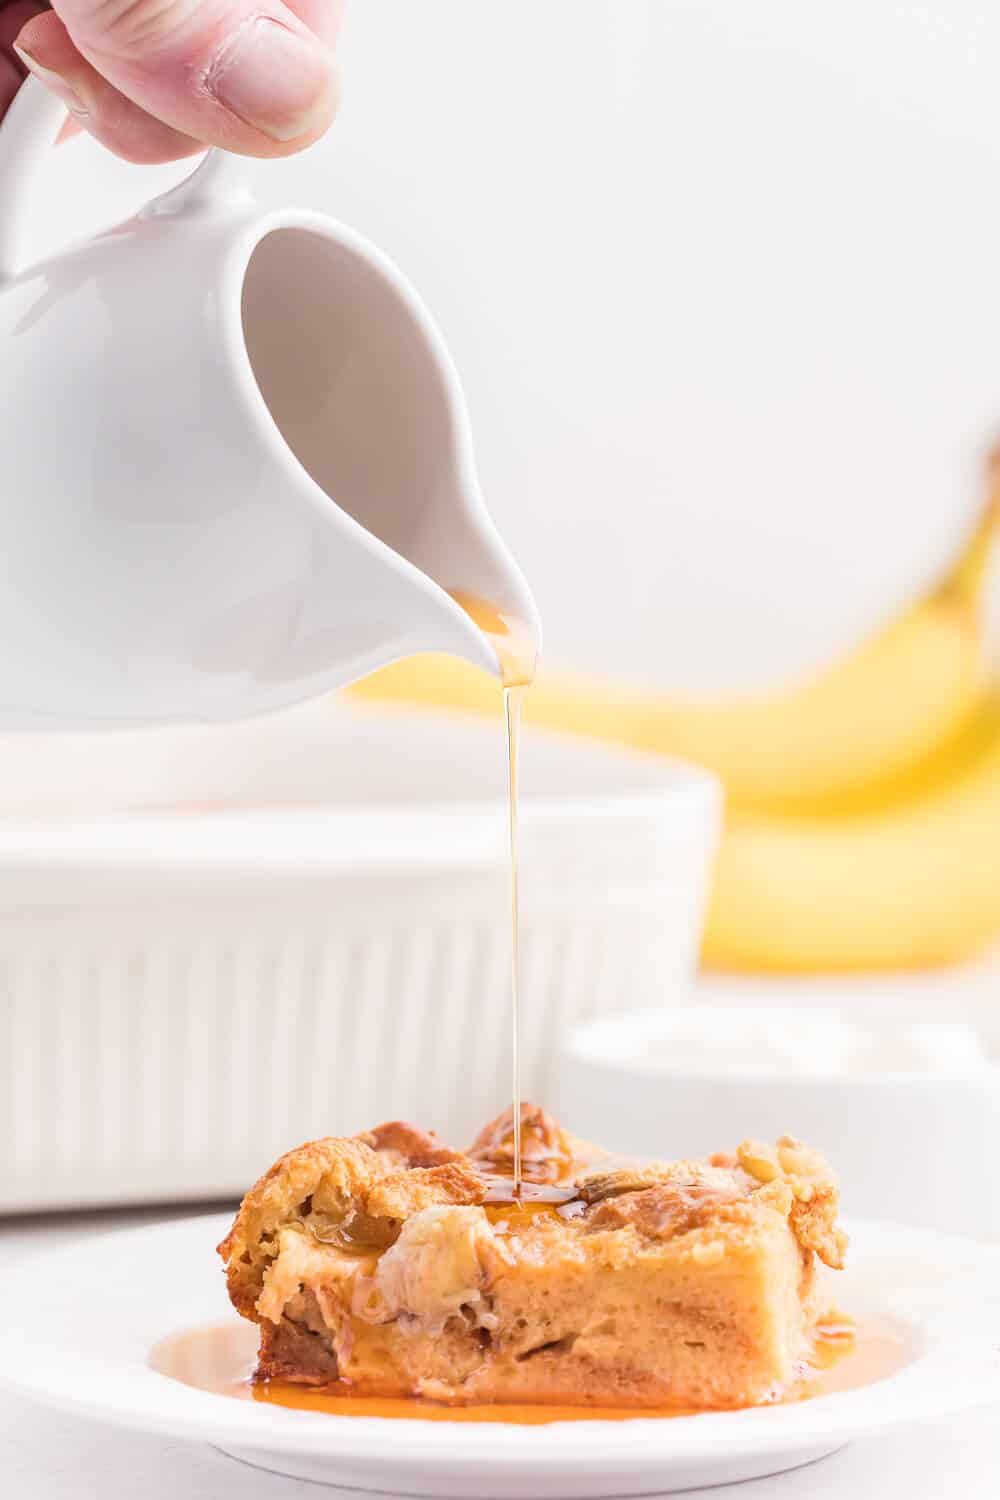 Banana Bread Breakfast Casserole - Use up your brown bananas and leftover bread in this crowd-pleasing breakfast recipe! It comes together in 10 minutes, bakes for 1 hour and is a recipe you'll find yourself making again and again.